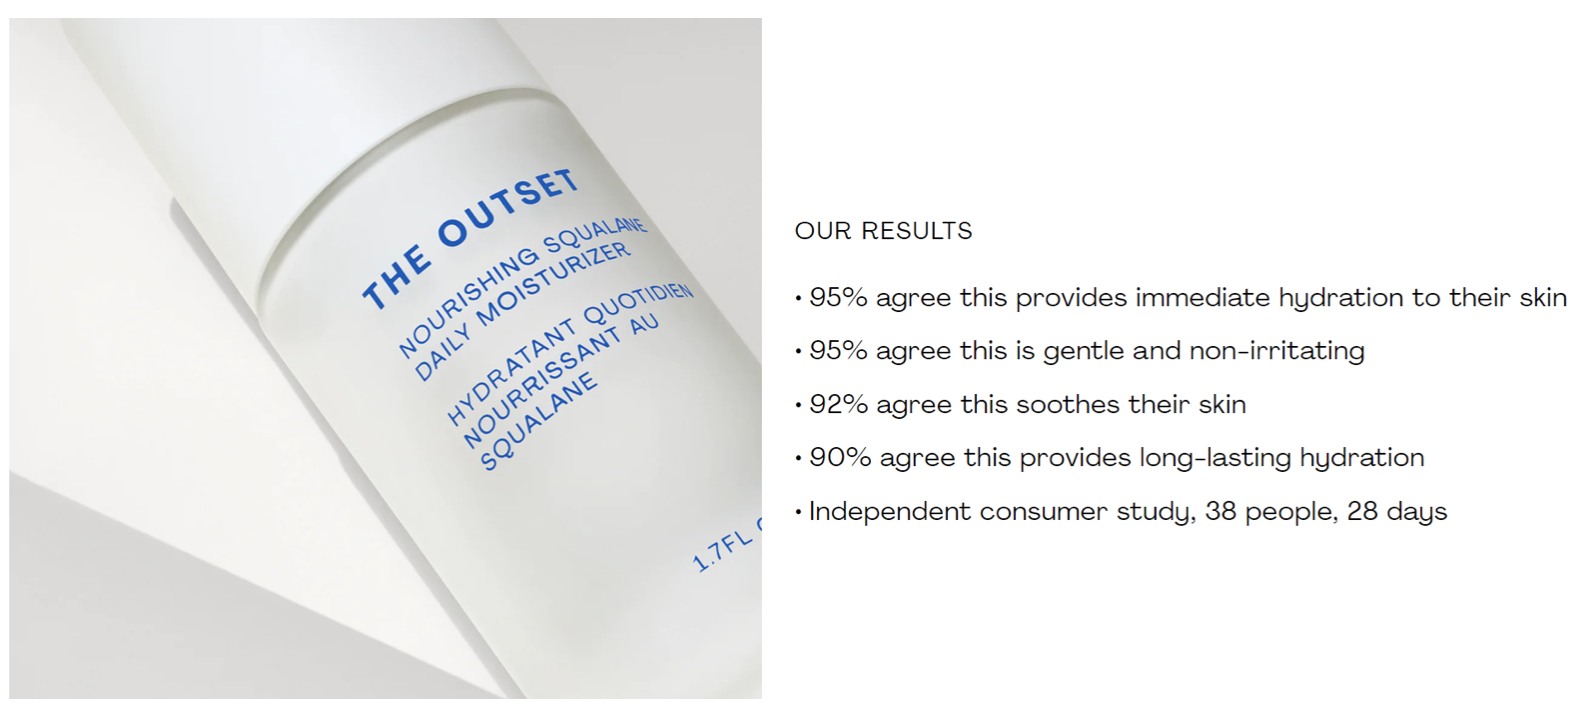 The Outset - Daily Moisturizer - Claims in Action